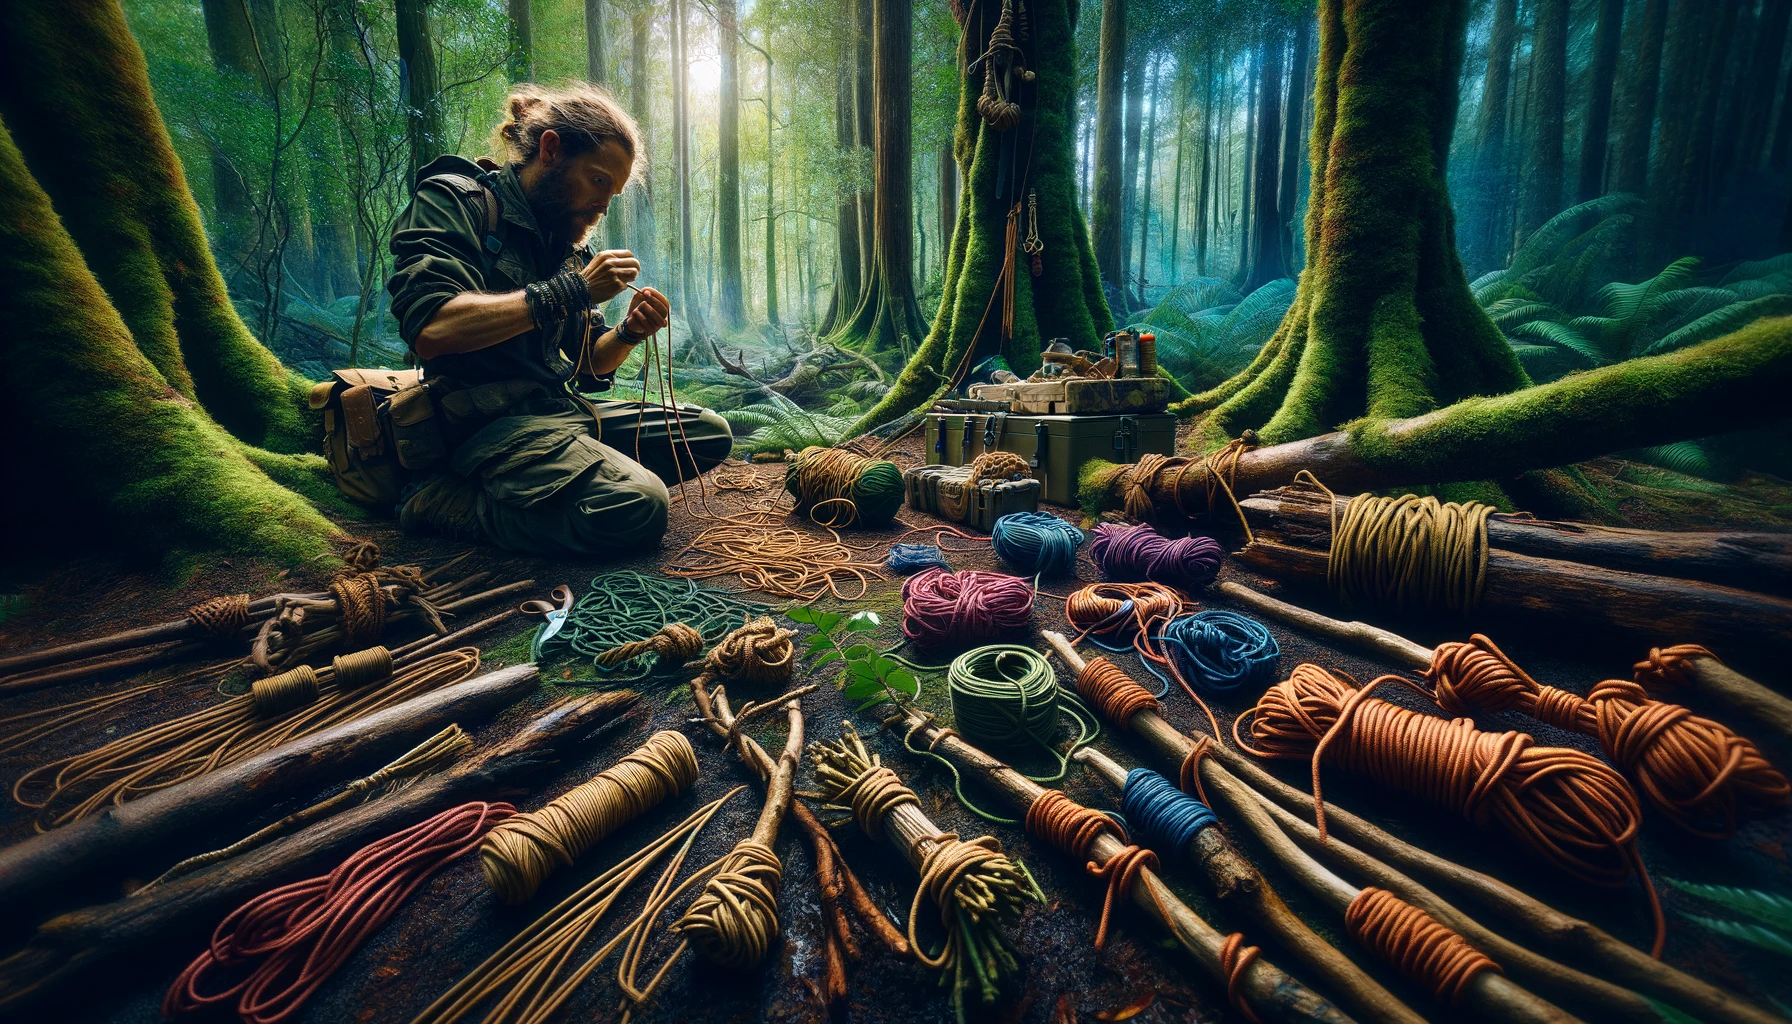 Detailed survival scene demonstrating crafting and using cordage and knots, with a person making cordage from natural fibers and showcasing various practical knots on branches and tools, set in a vibrant forest clearing, highlighting self-reliance and essential survival techniques